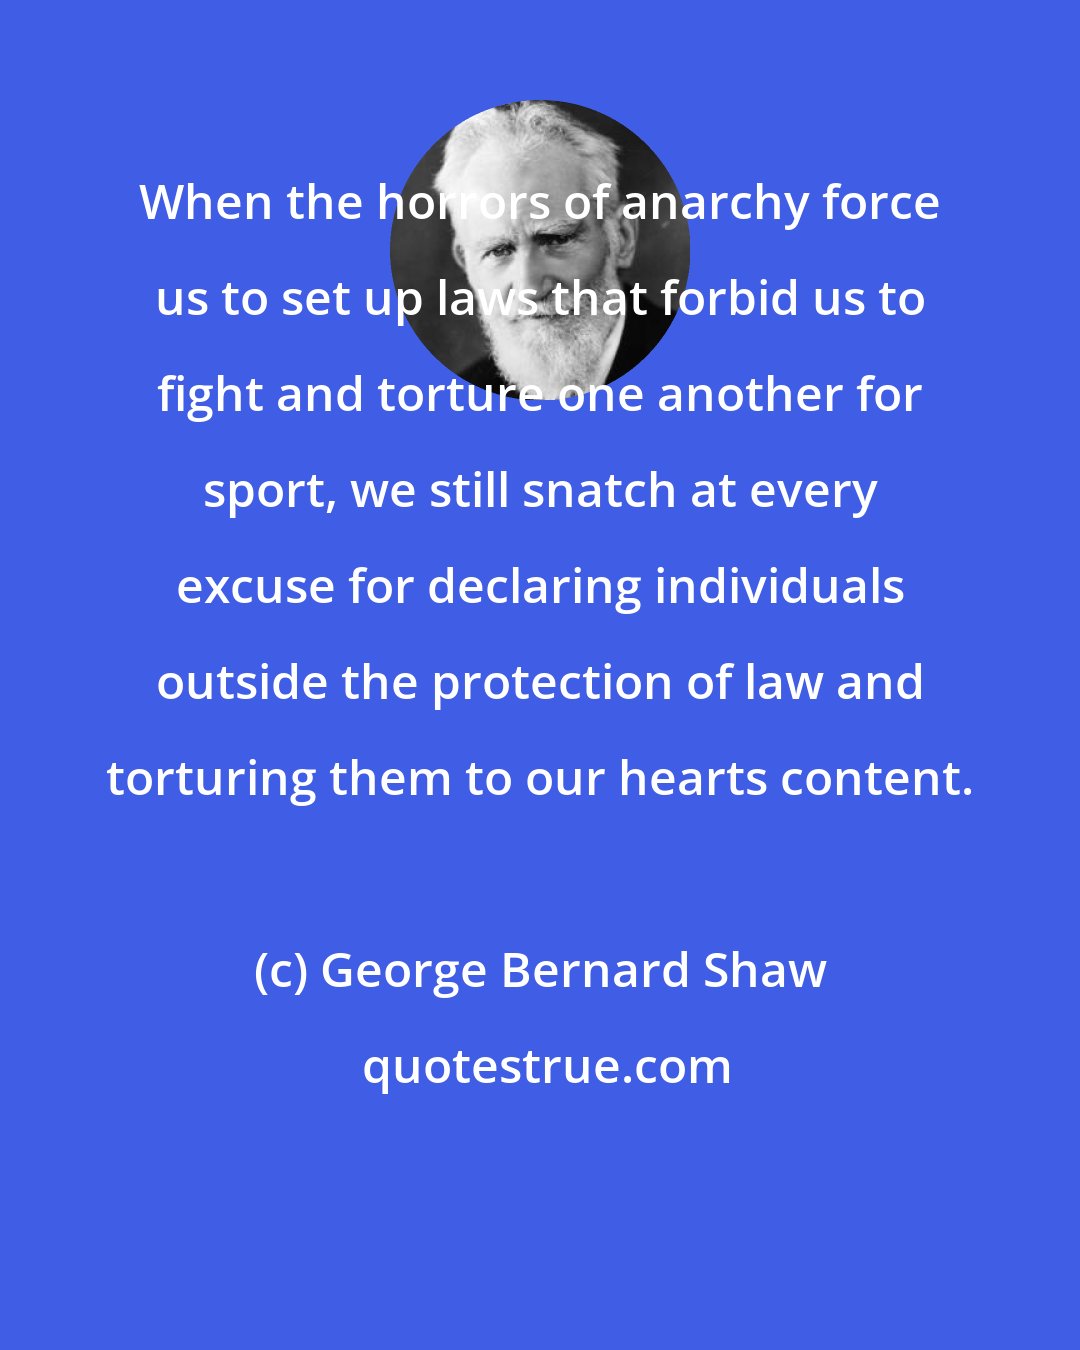 George Bernard Shaw: When the horrors of anarchy force us to set up laws that forbid us to fight and torture one another for sport, we still snatch at every excuse for declaring individuals outside the protection of law and torturing them to our hearts content.